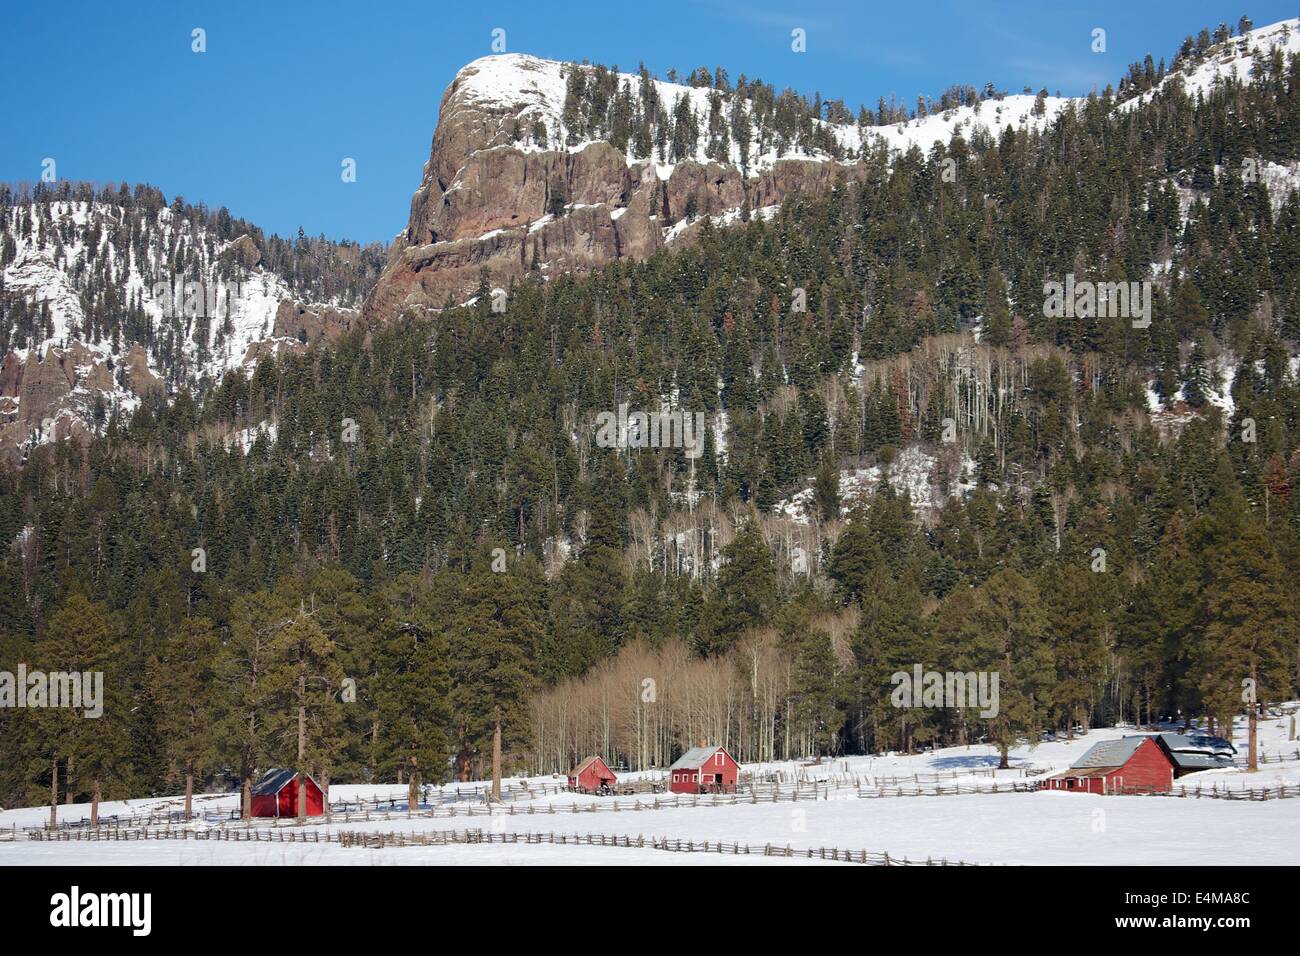 Beautiful winter scene of snow and red barns on a farm in the Rocky Mountains in Colorado. Stock Photo